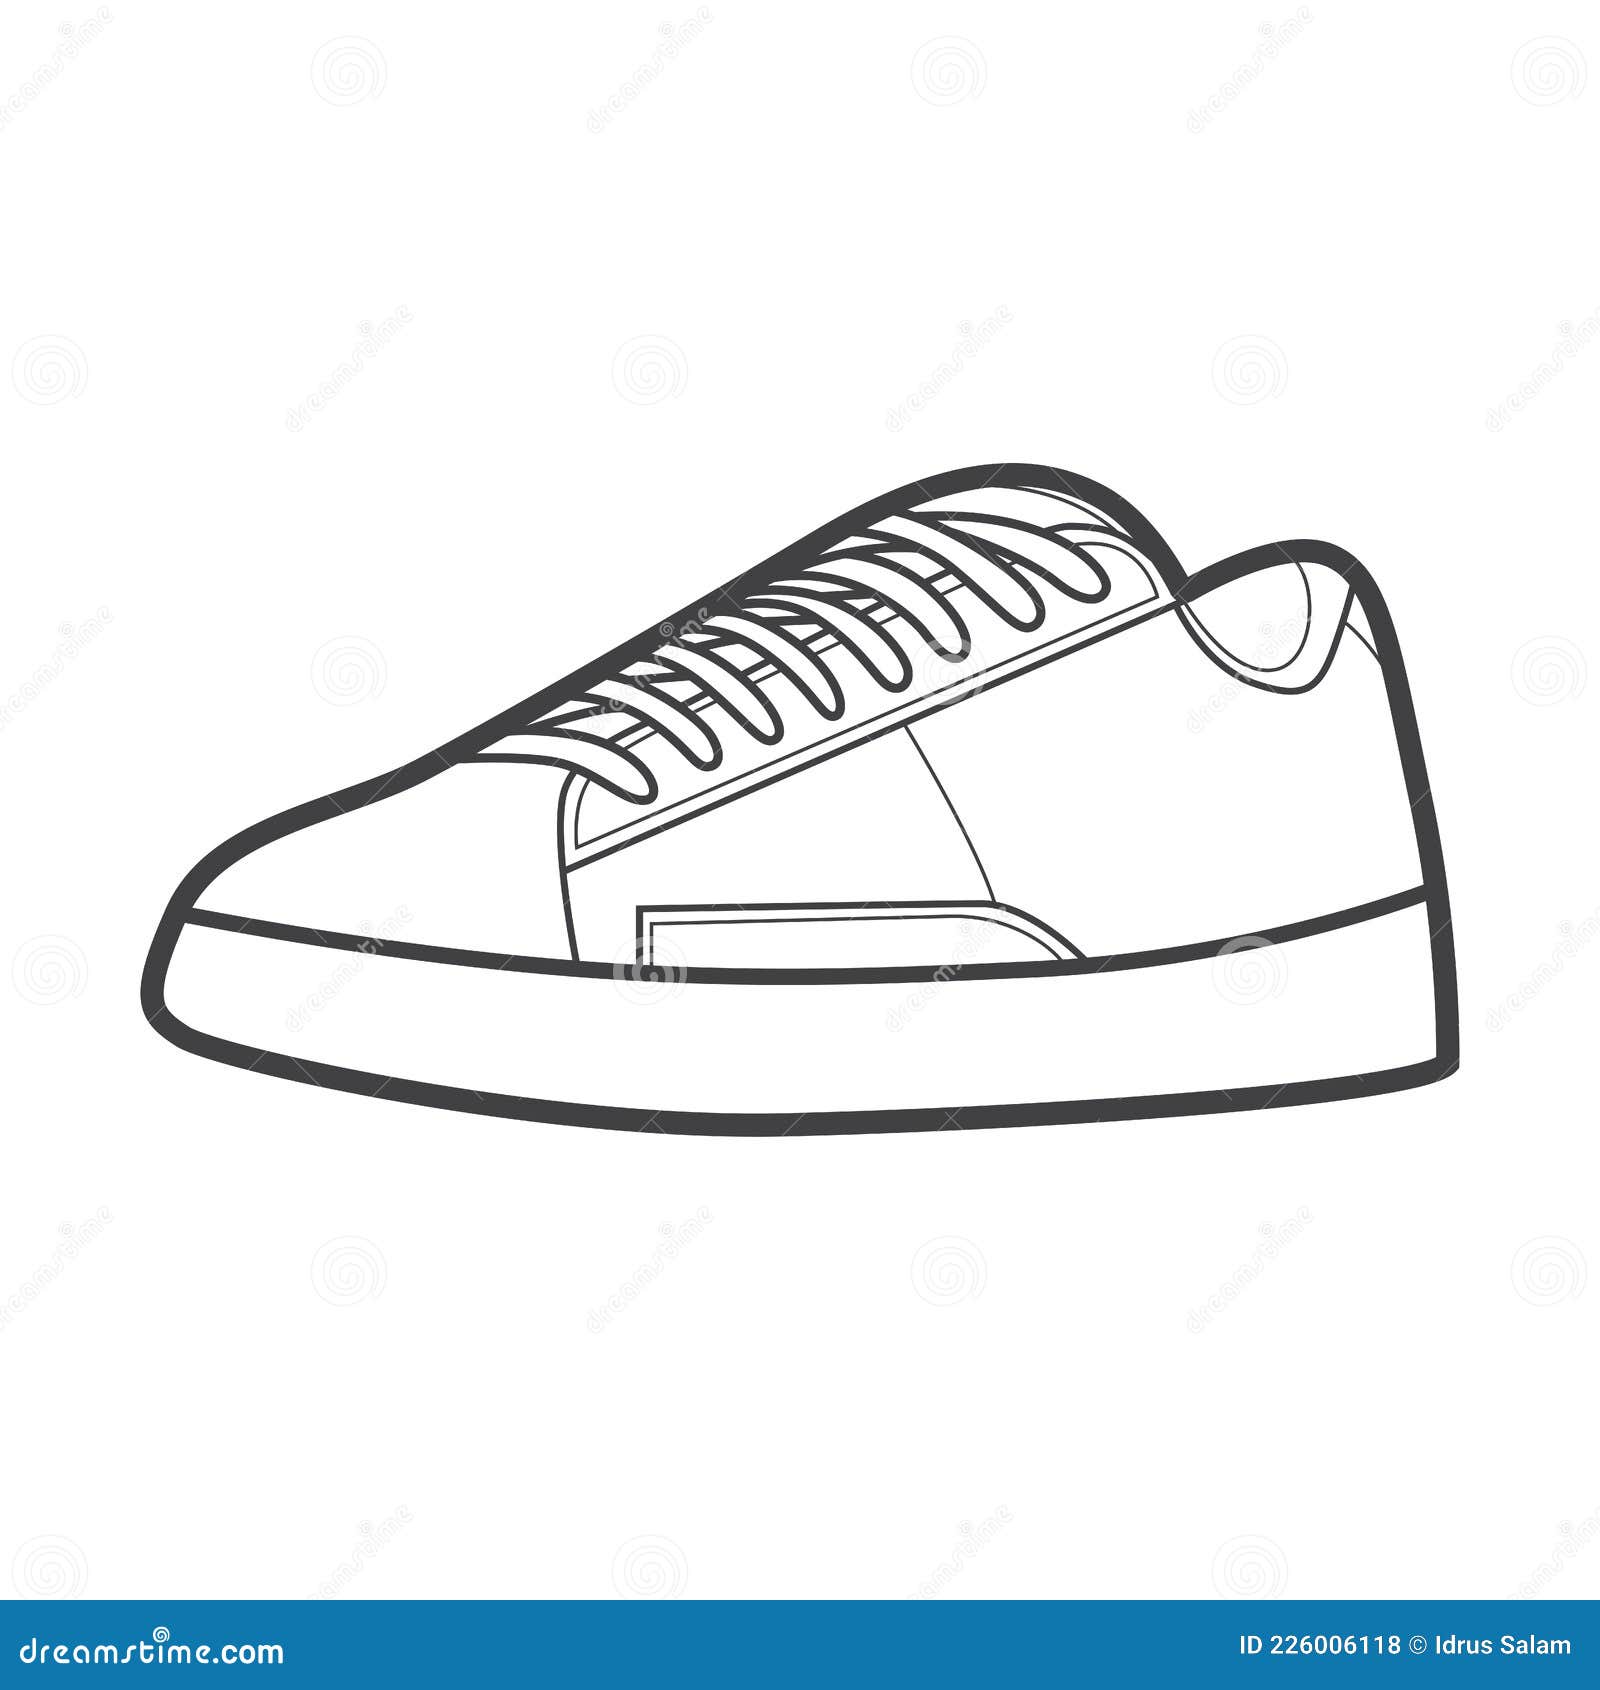 Shoes Sneaker Outline Drawing Vector, Sneakers Drawn in a Sketch Style ...